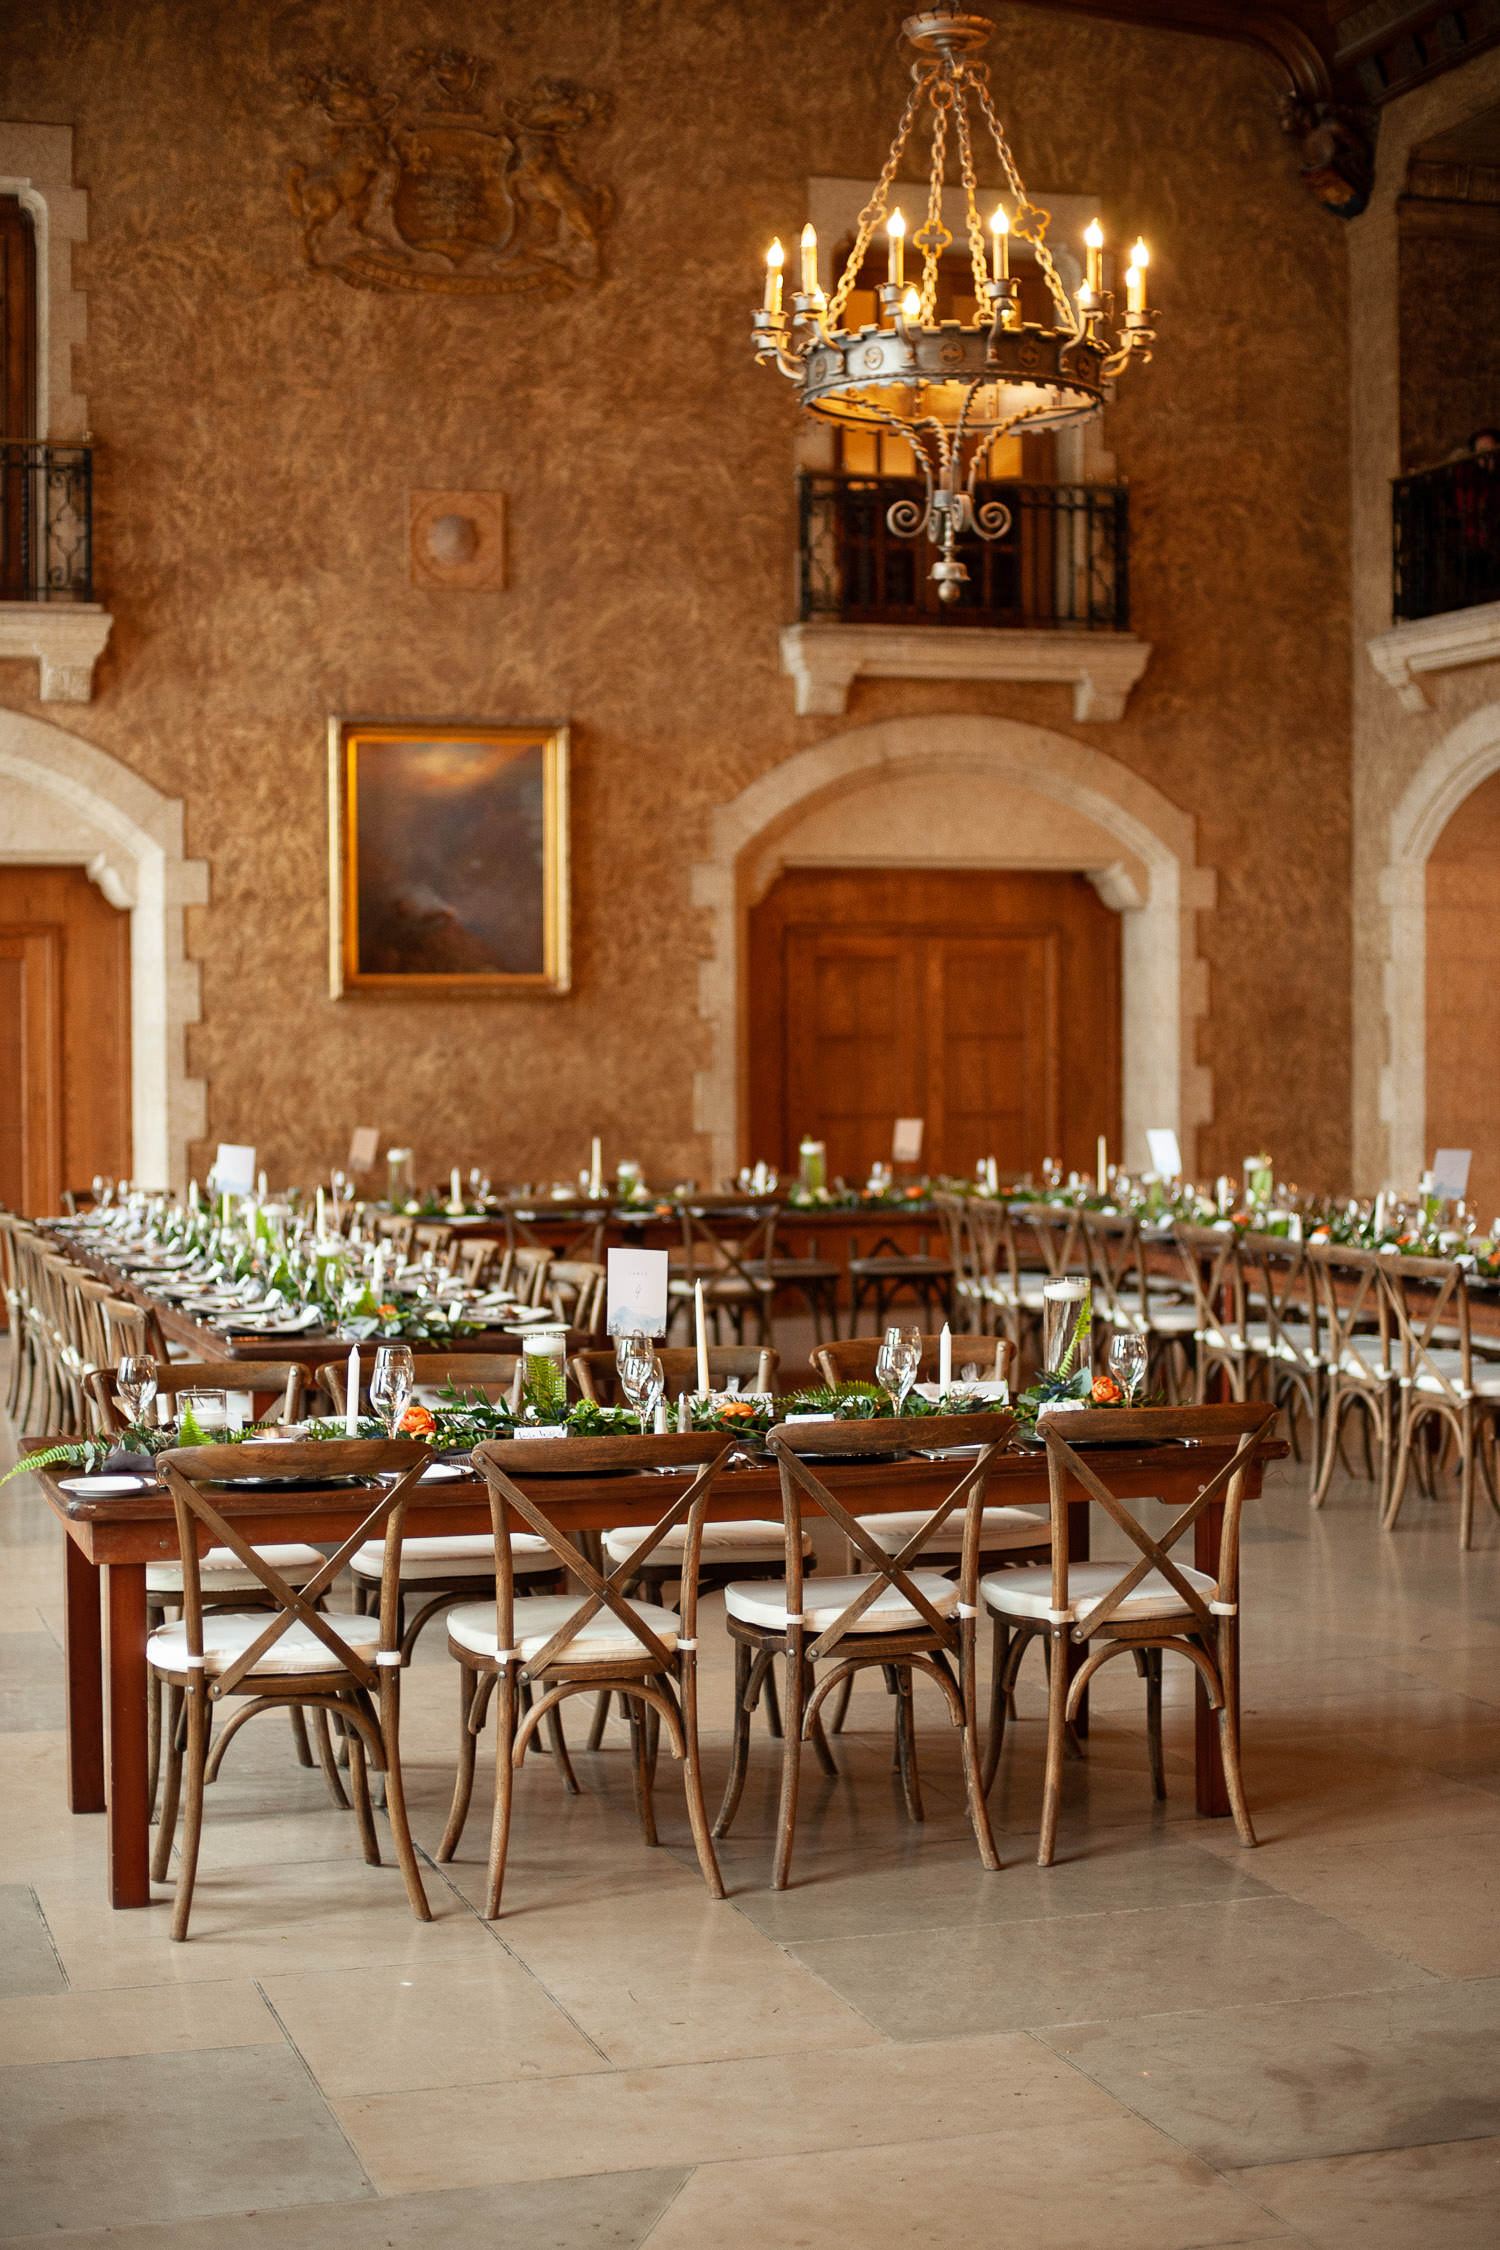 Rustic rehearsal dinner in Mt. Stephen Hall captured by Tara Whittaker Photography